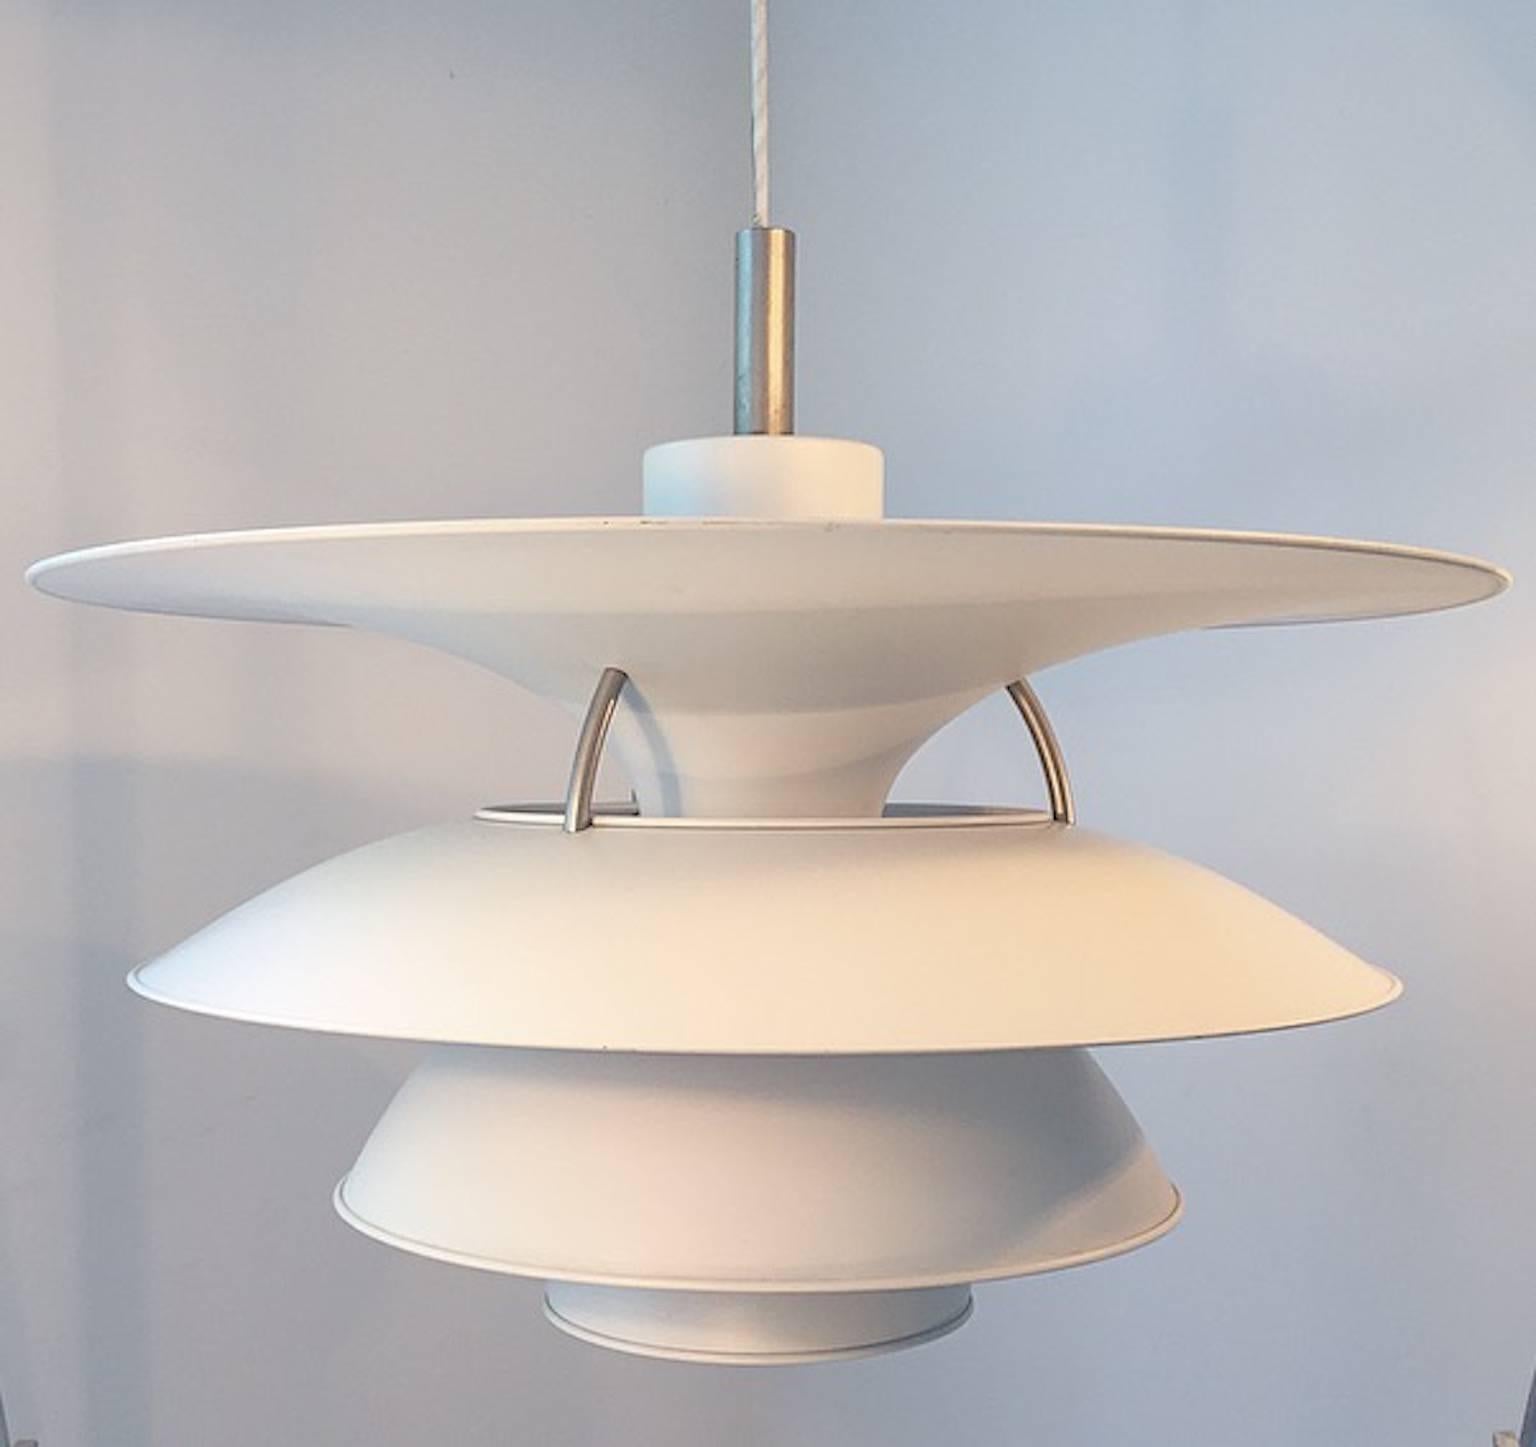 Cold-Painted X-Large Ceiling Lamp Charlottenborg by Poul Henningsen for Louis Poulsen